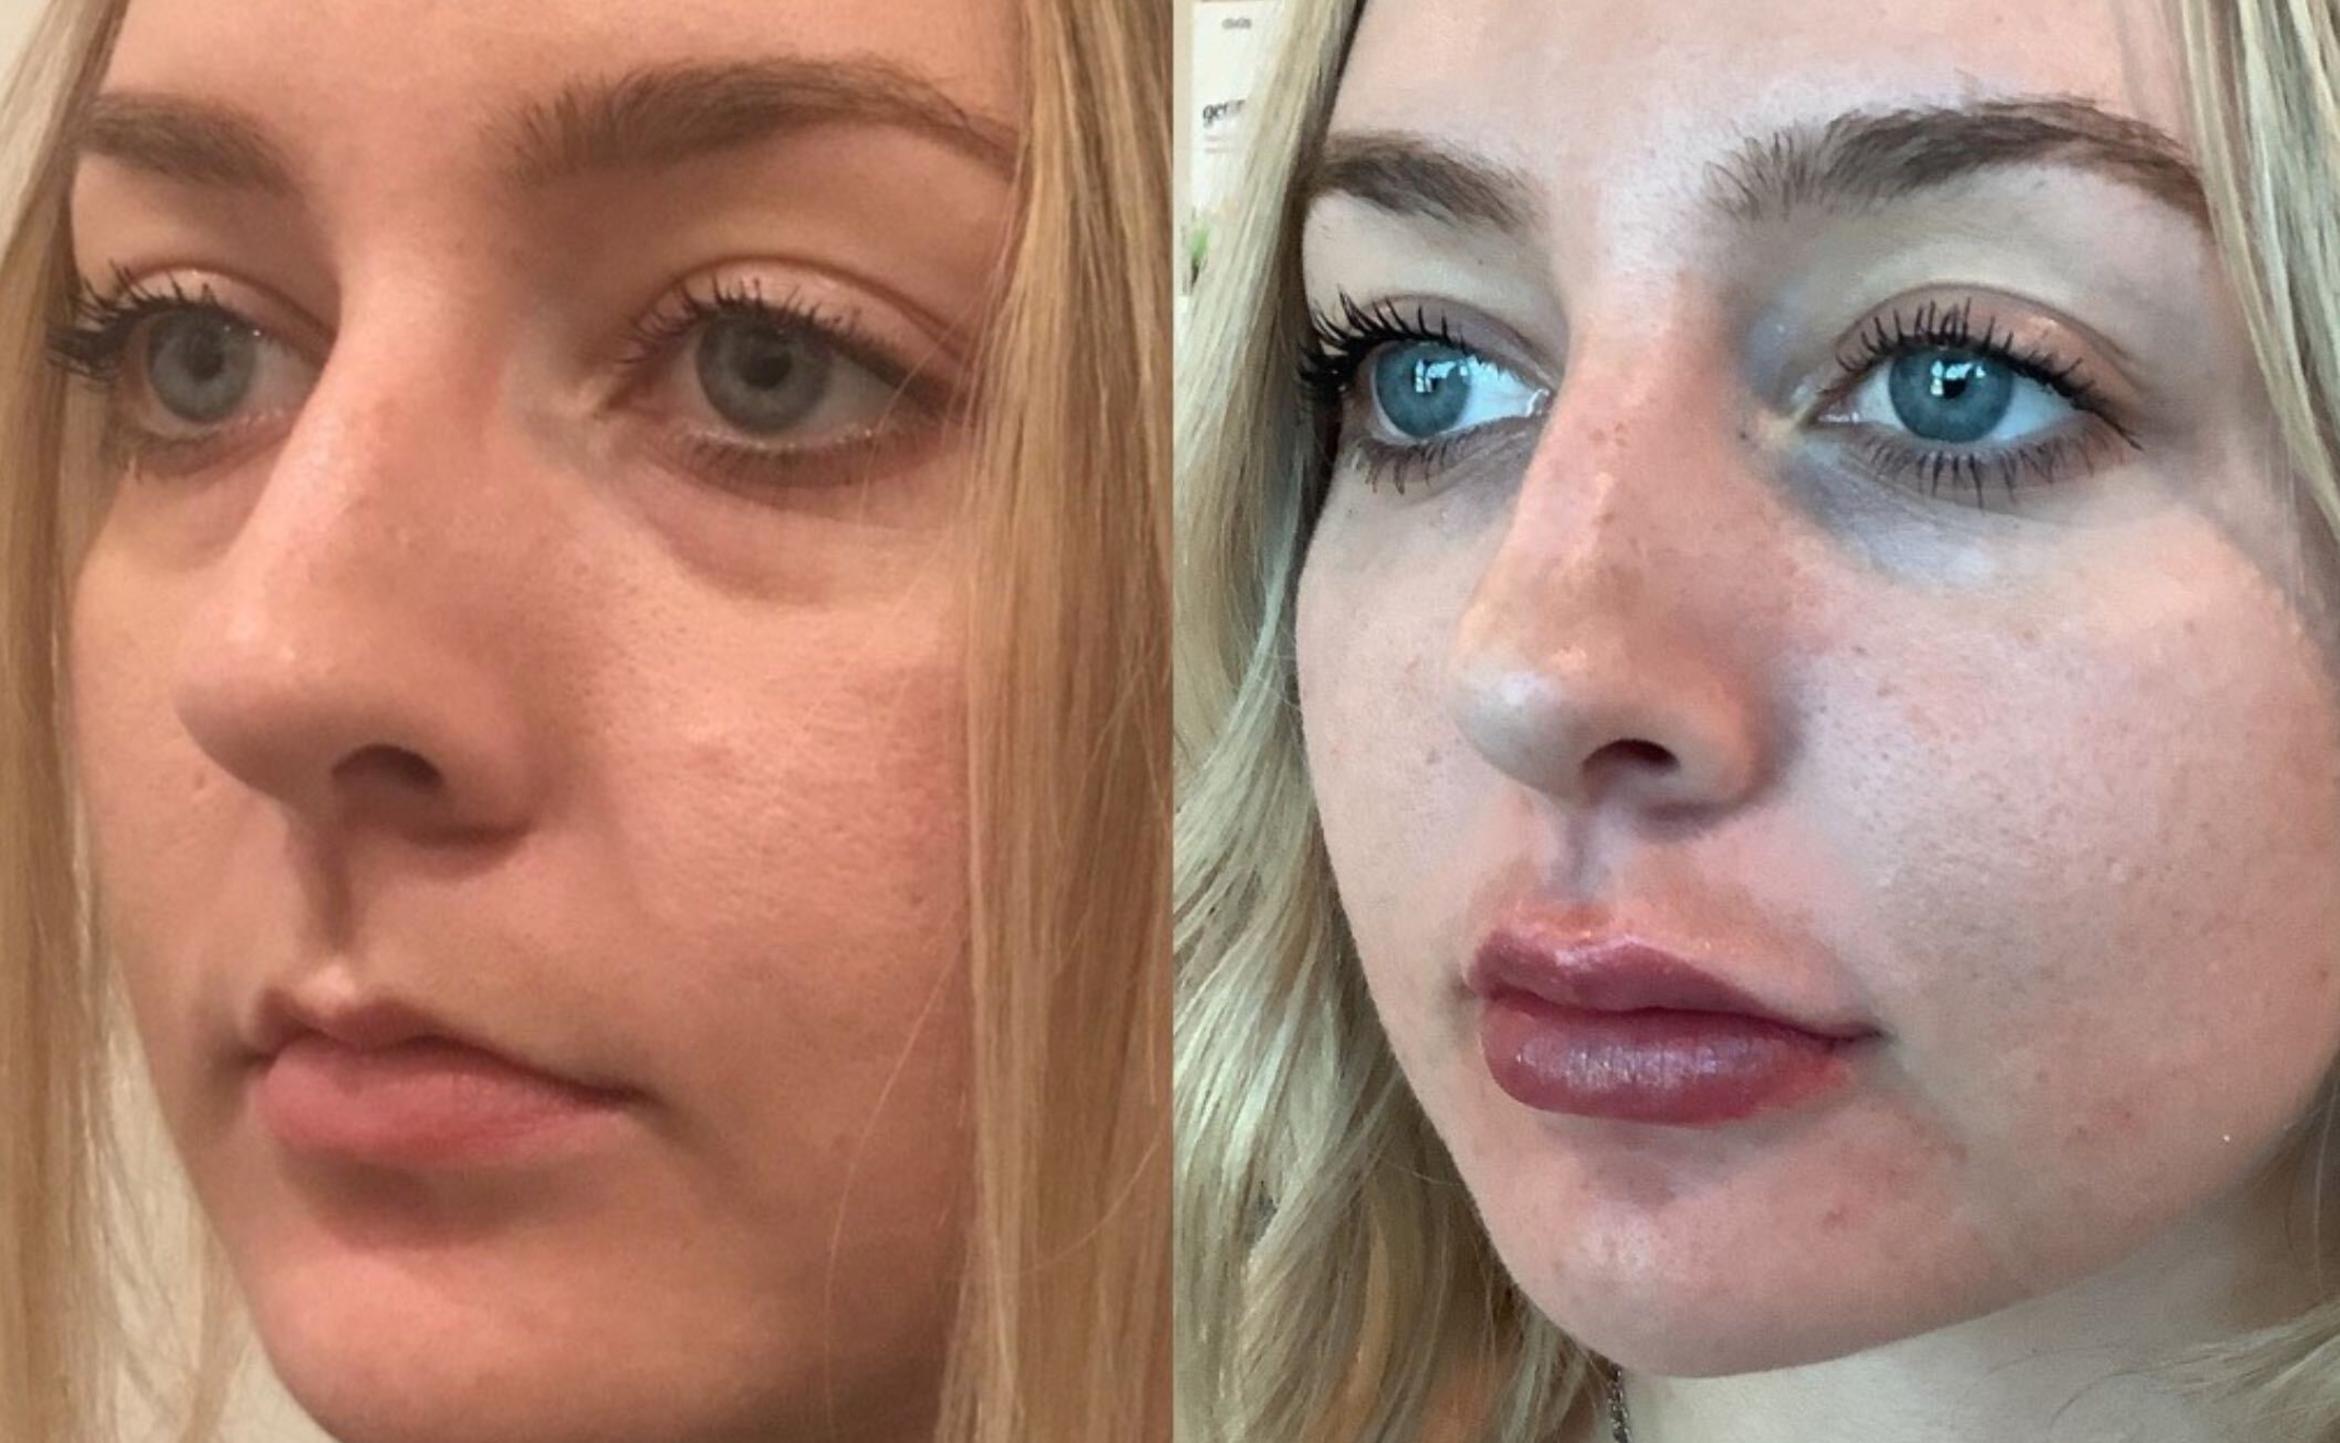 Dermal Fillers Before And After Pictures Case Sacramento Ca Destination Aesthetics